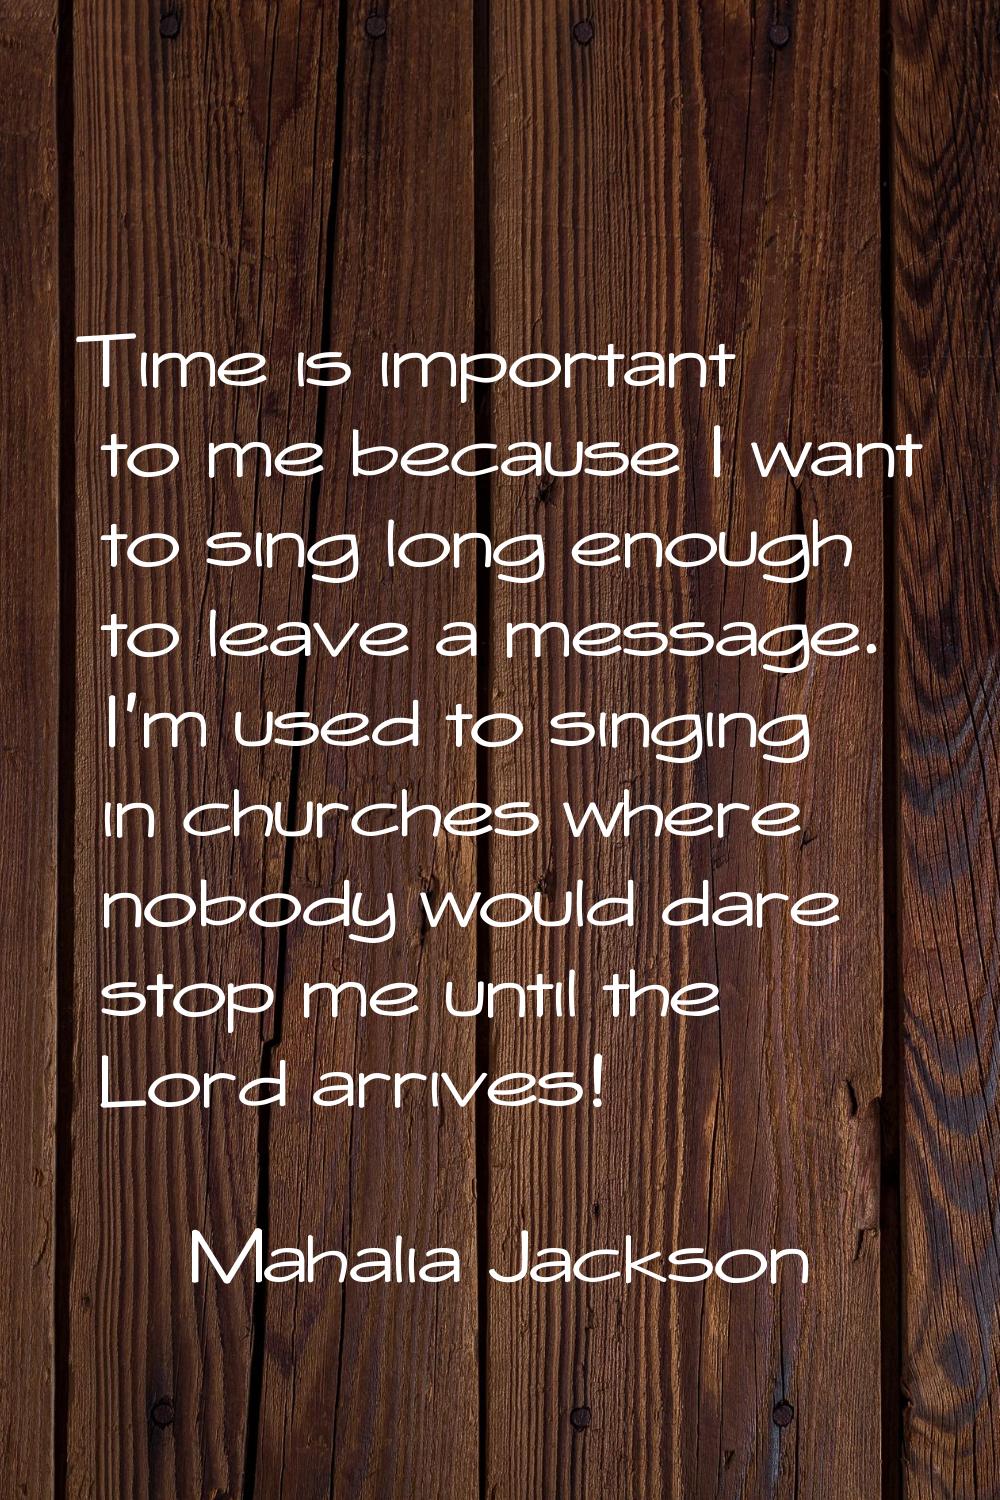 Time is important to me because I want to sing long enough to leave a message. I'm used to singing 